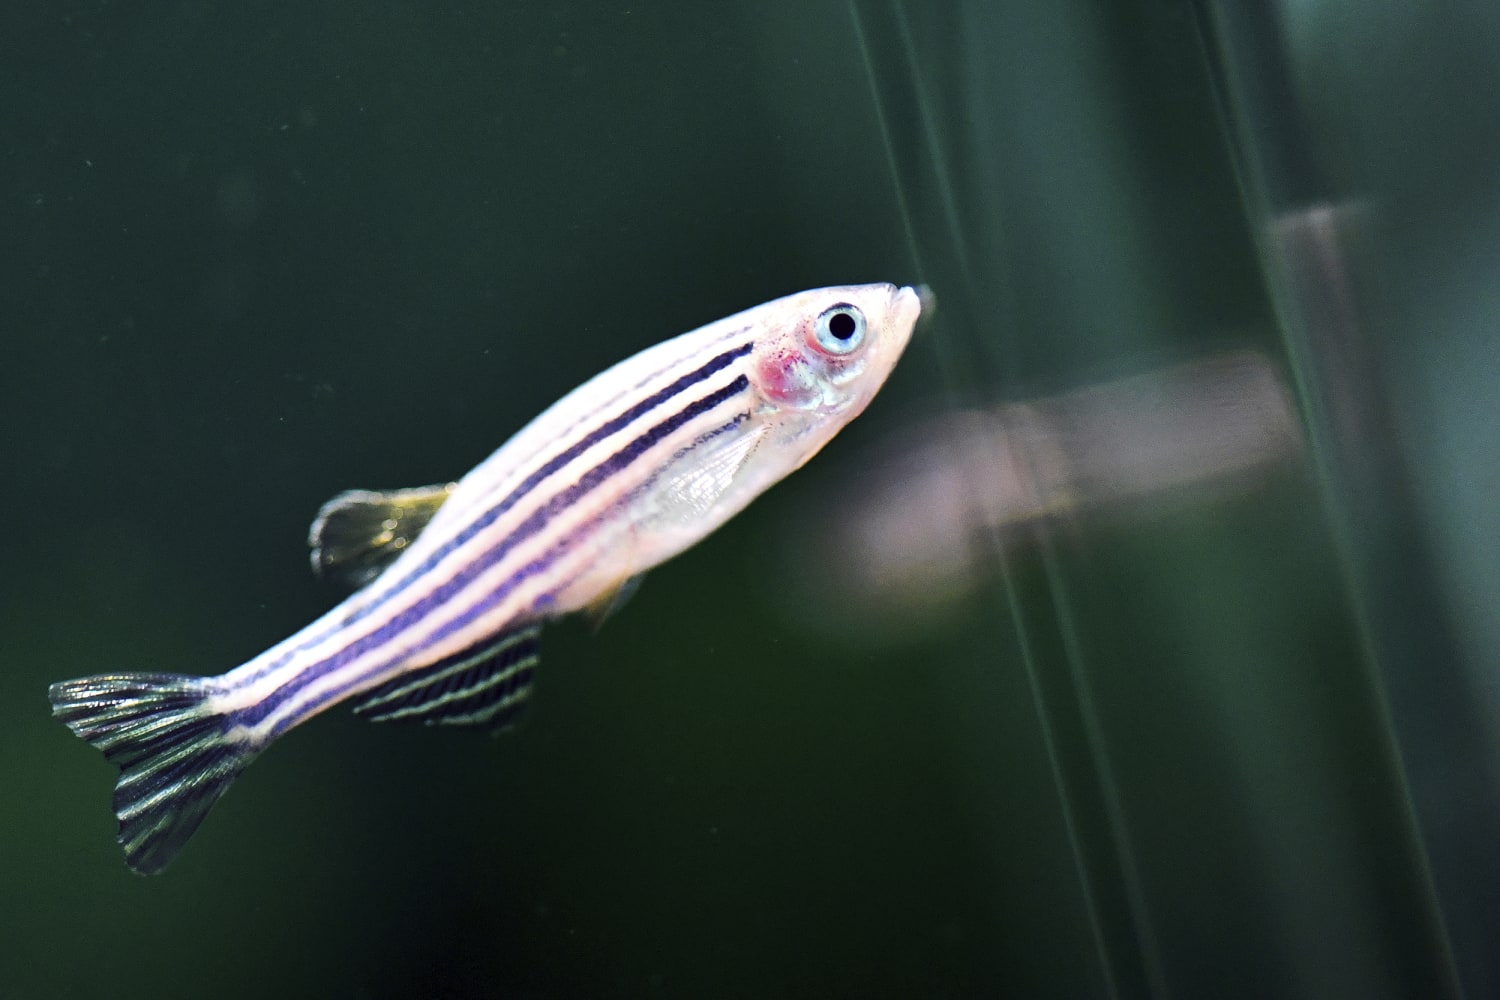 Fish can sense fear in other fish and become afraid, too, study shows